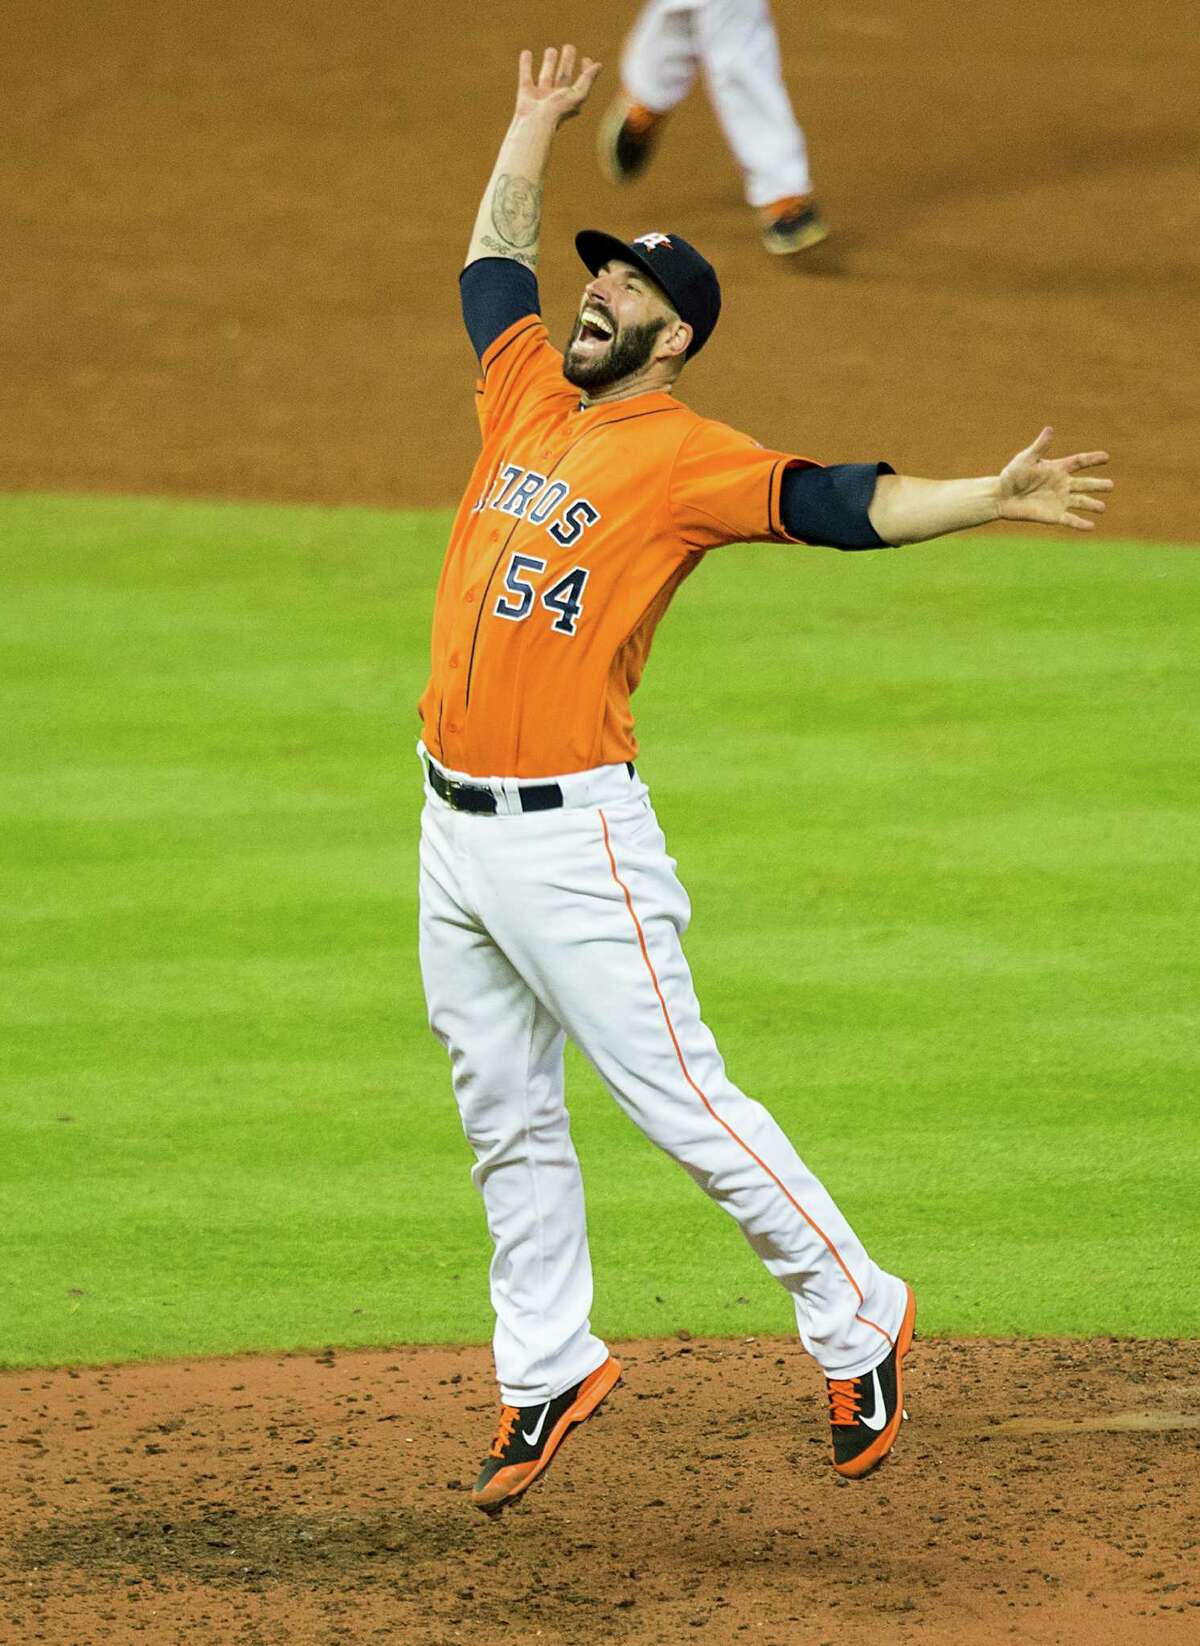 Mike Fiers no-hitter: Astros pitcher shuts down Dodgers - Sports